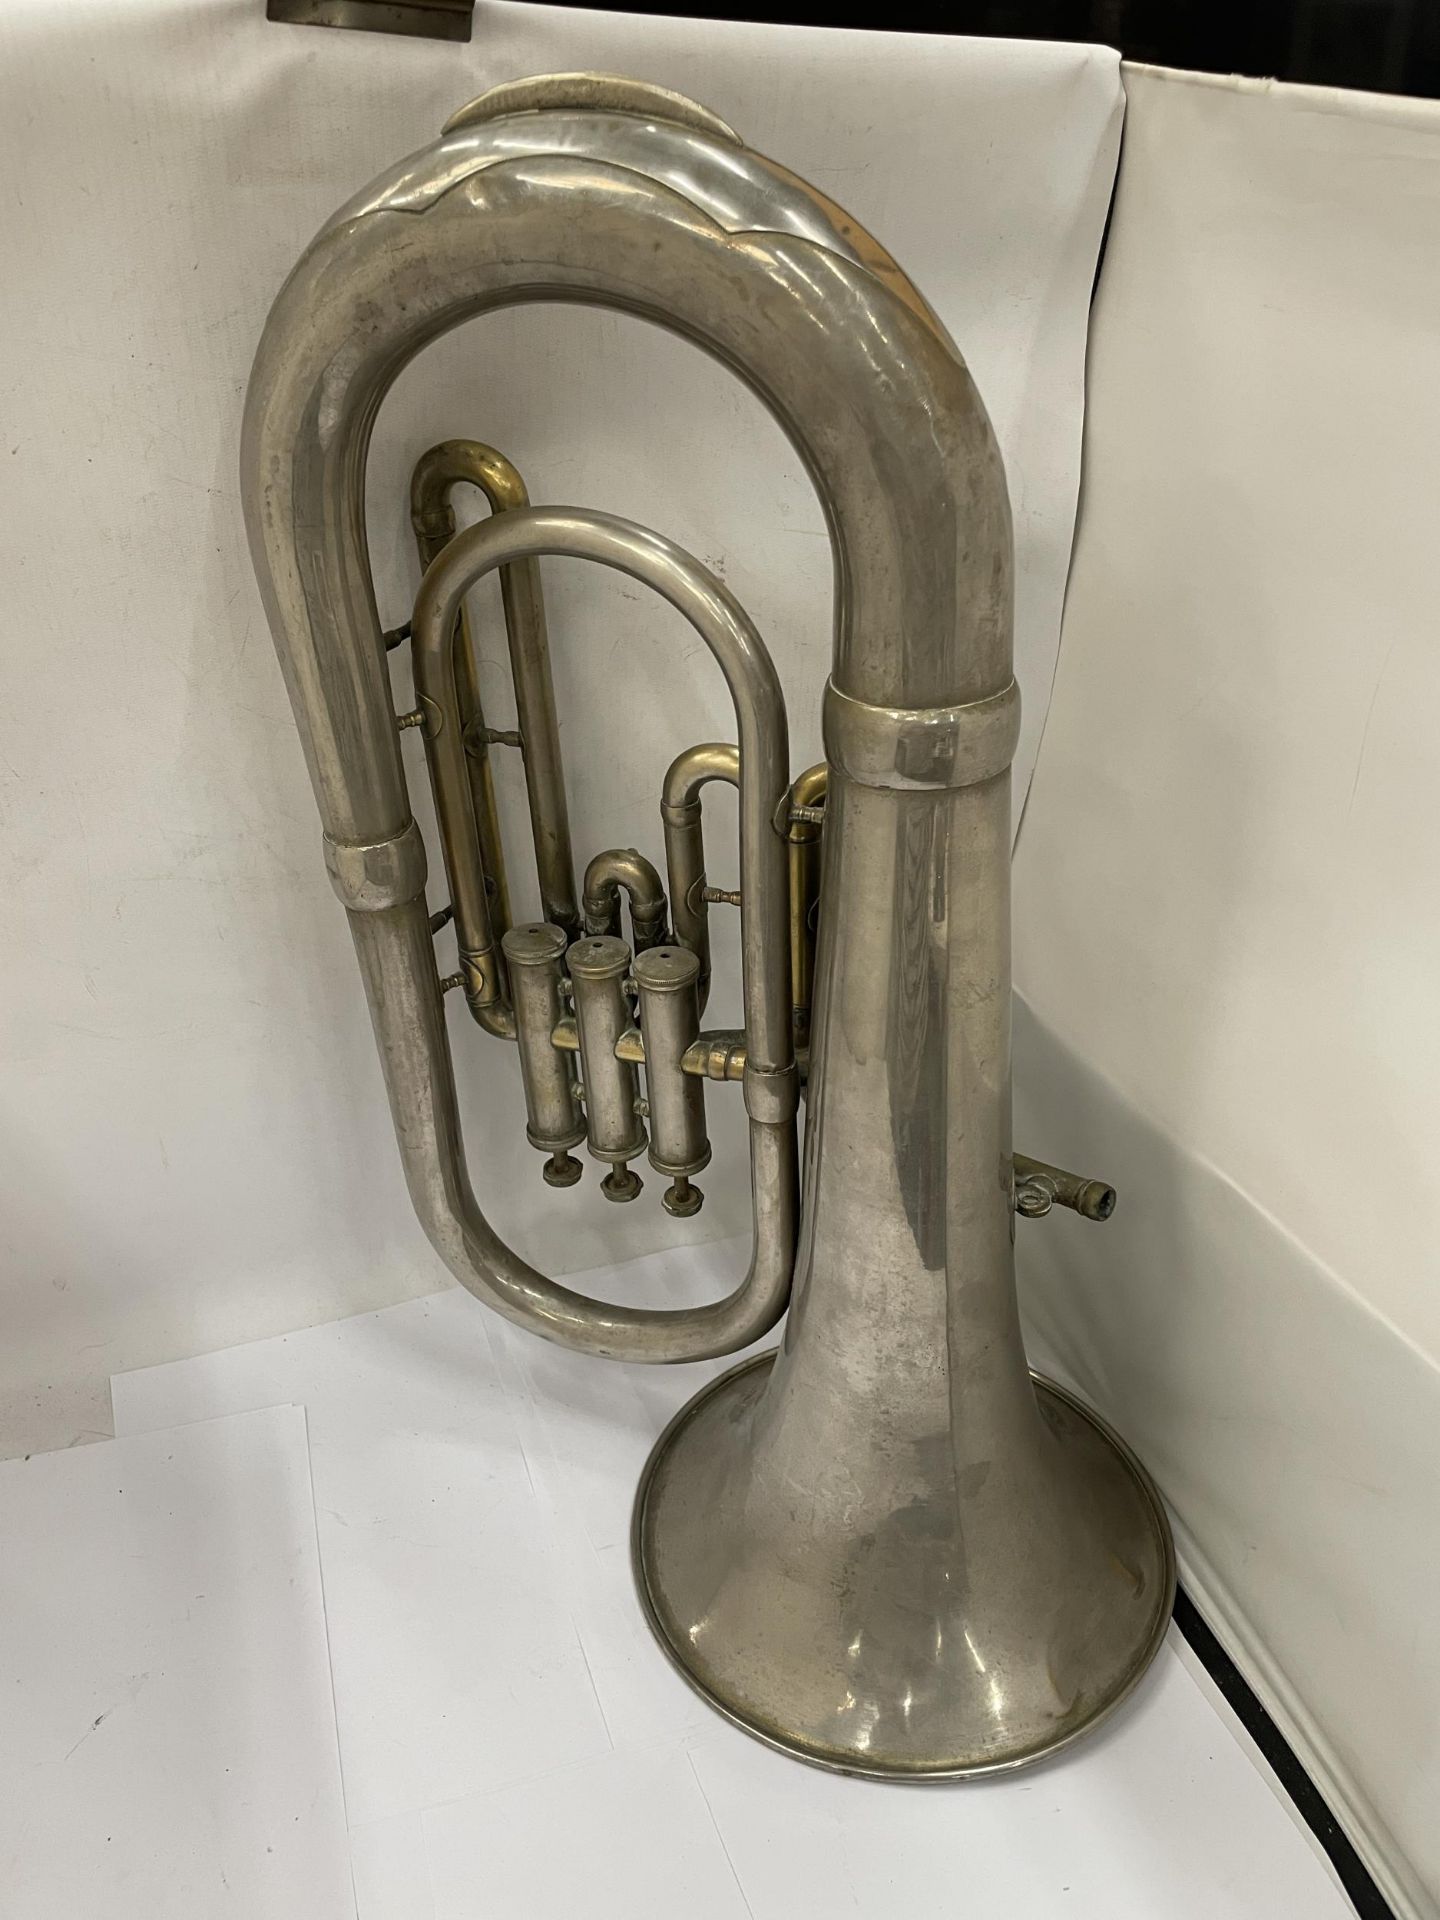 A VINTAGE SILVER PLATED TUBA - Image 3 of 3